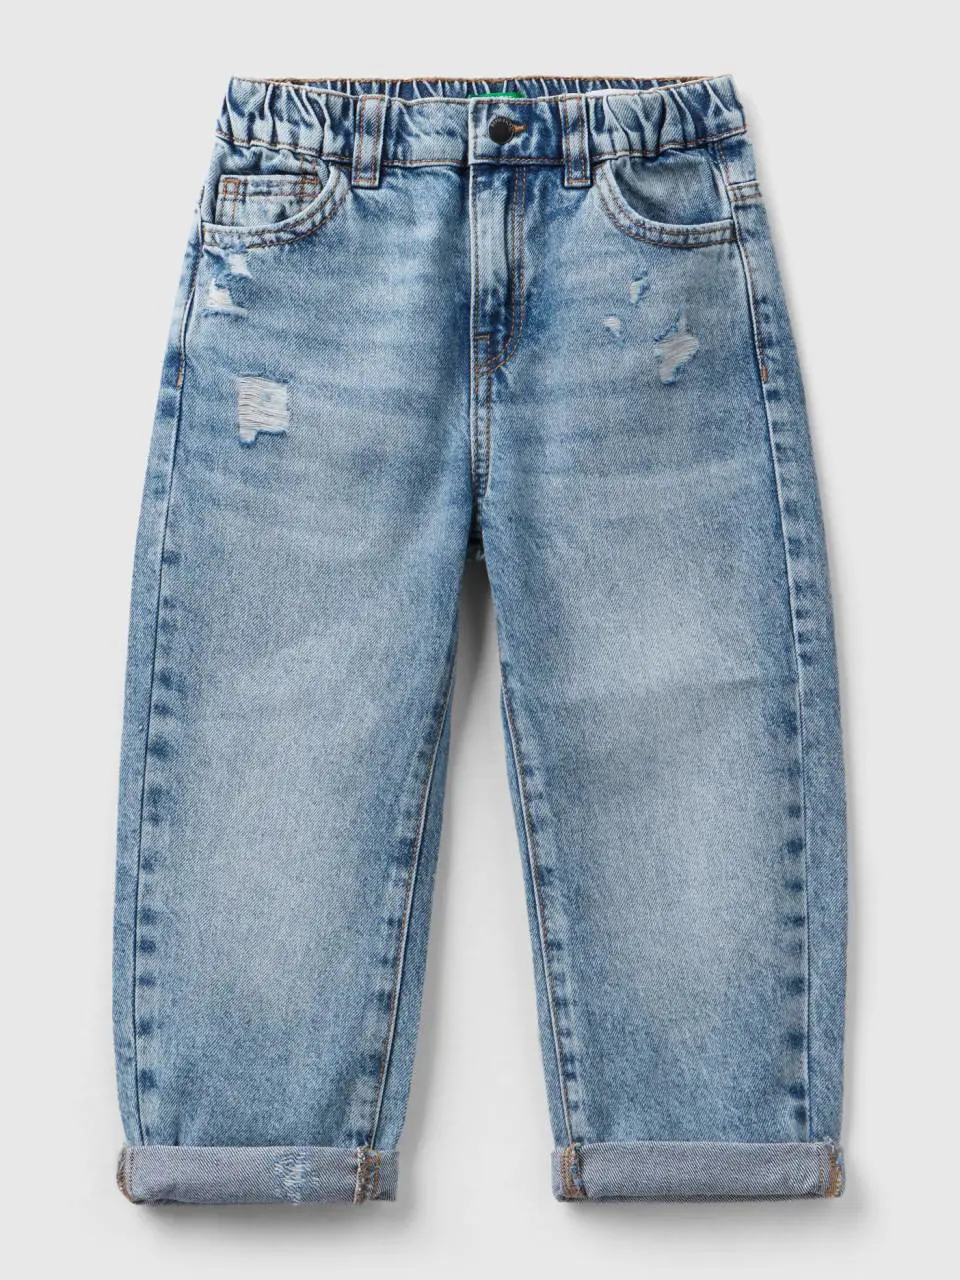 Benetton balloon fit jeans with rips. 1